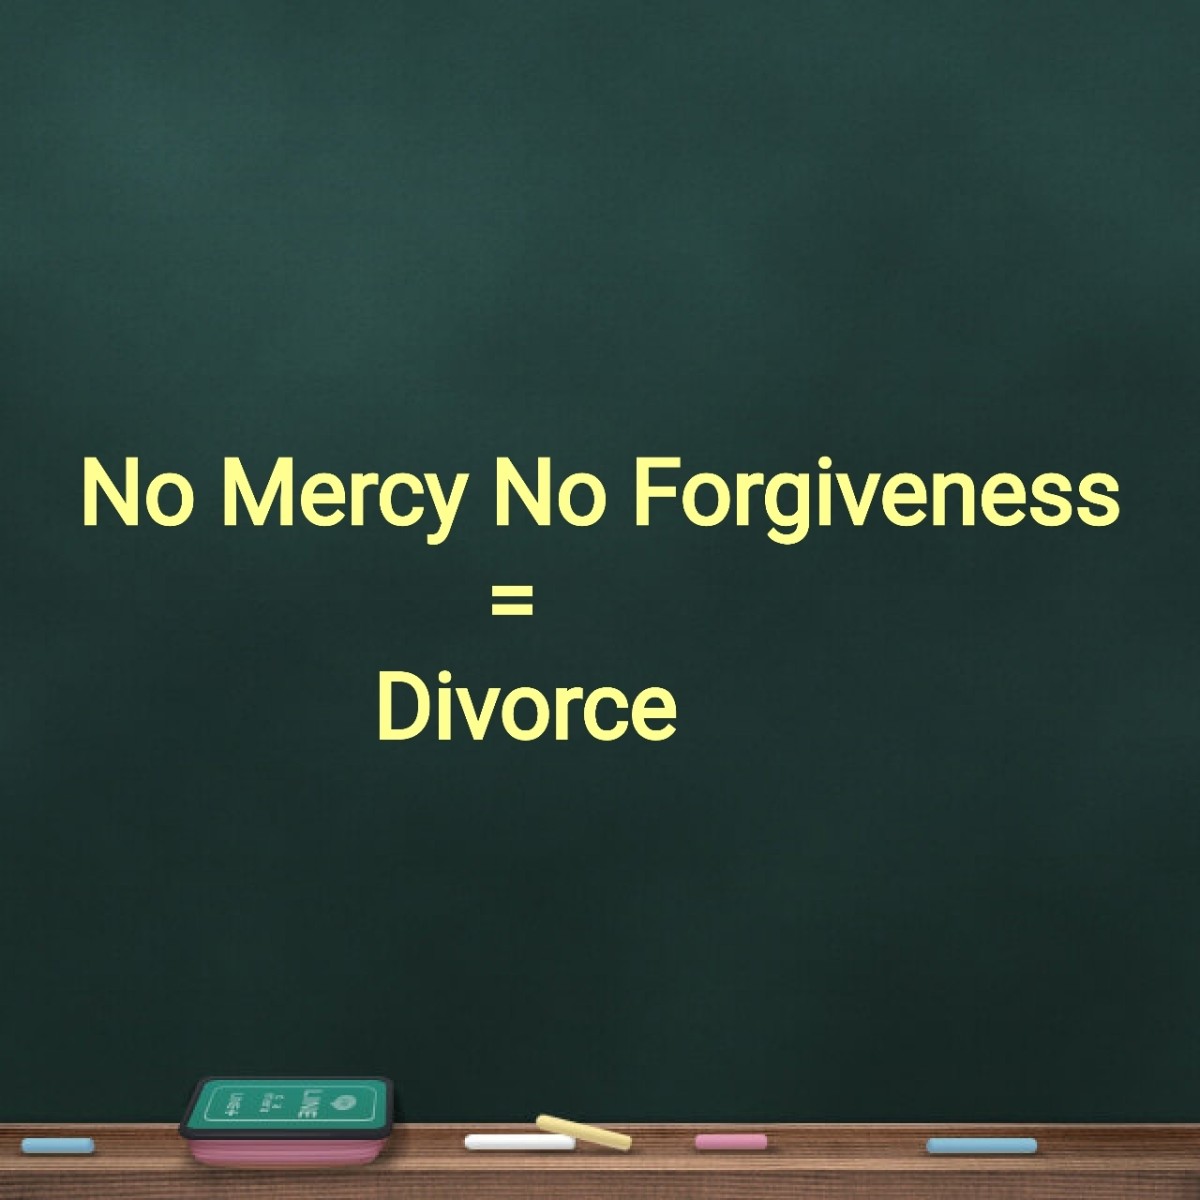 Divorce becomes easy when you are merciless and unforgiving.